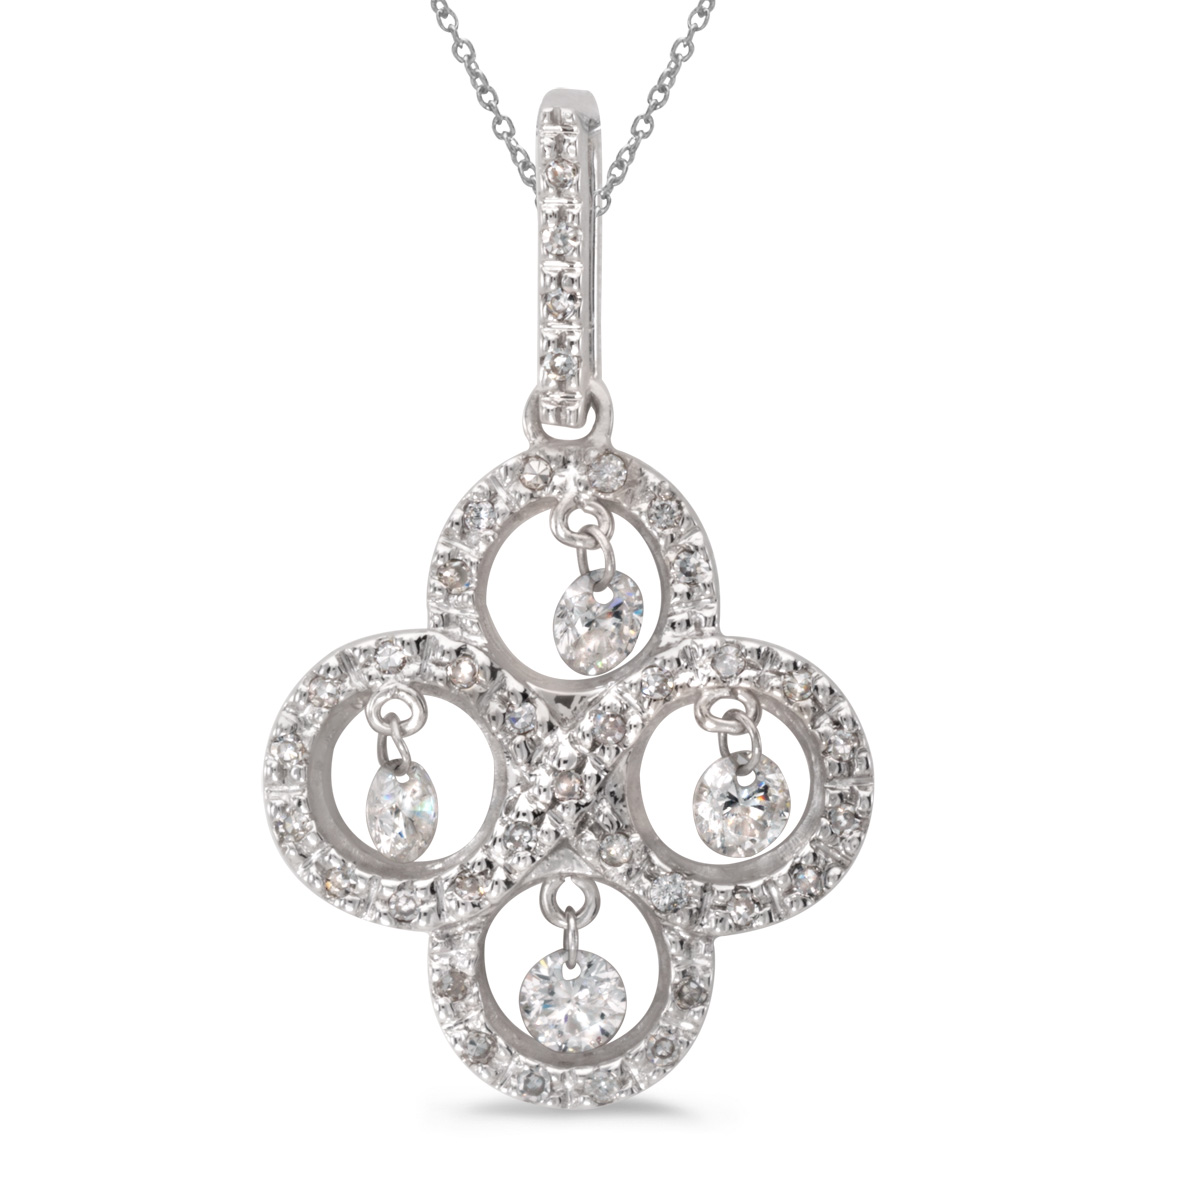 14k gold Dashinng Diamonds pendant with 0.43 total ct diamonds. The center dangling diamond dances and shimmers with every heartbeat.